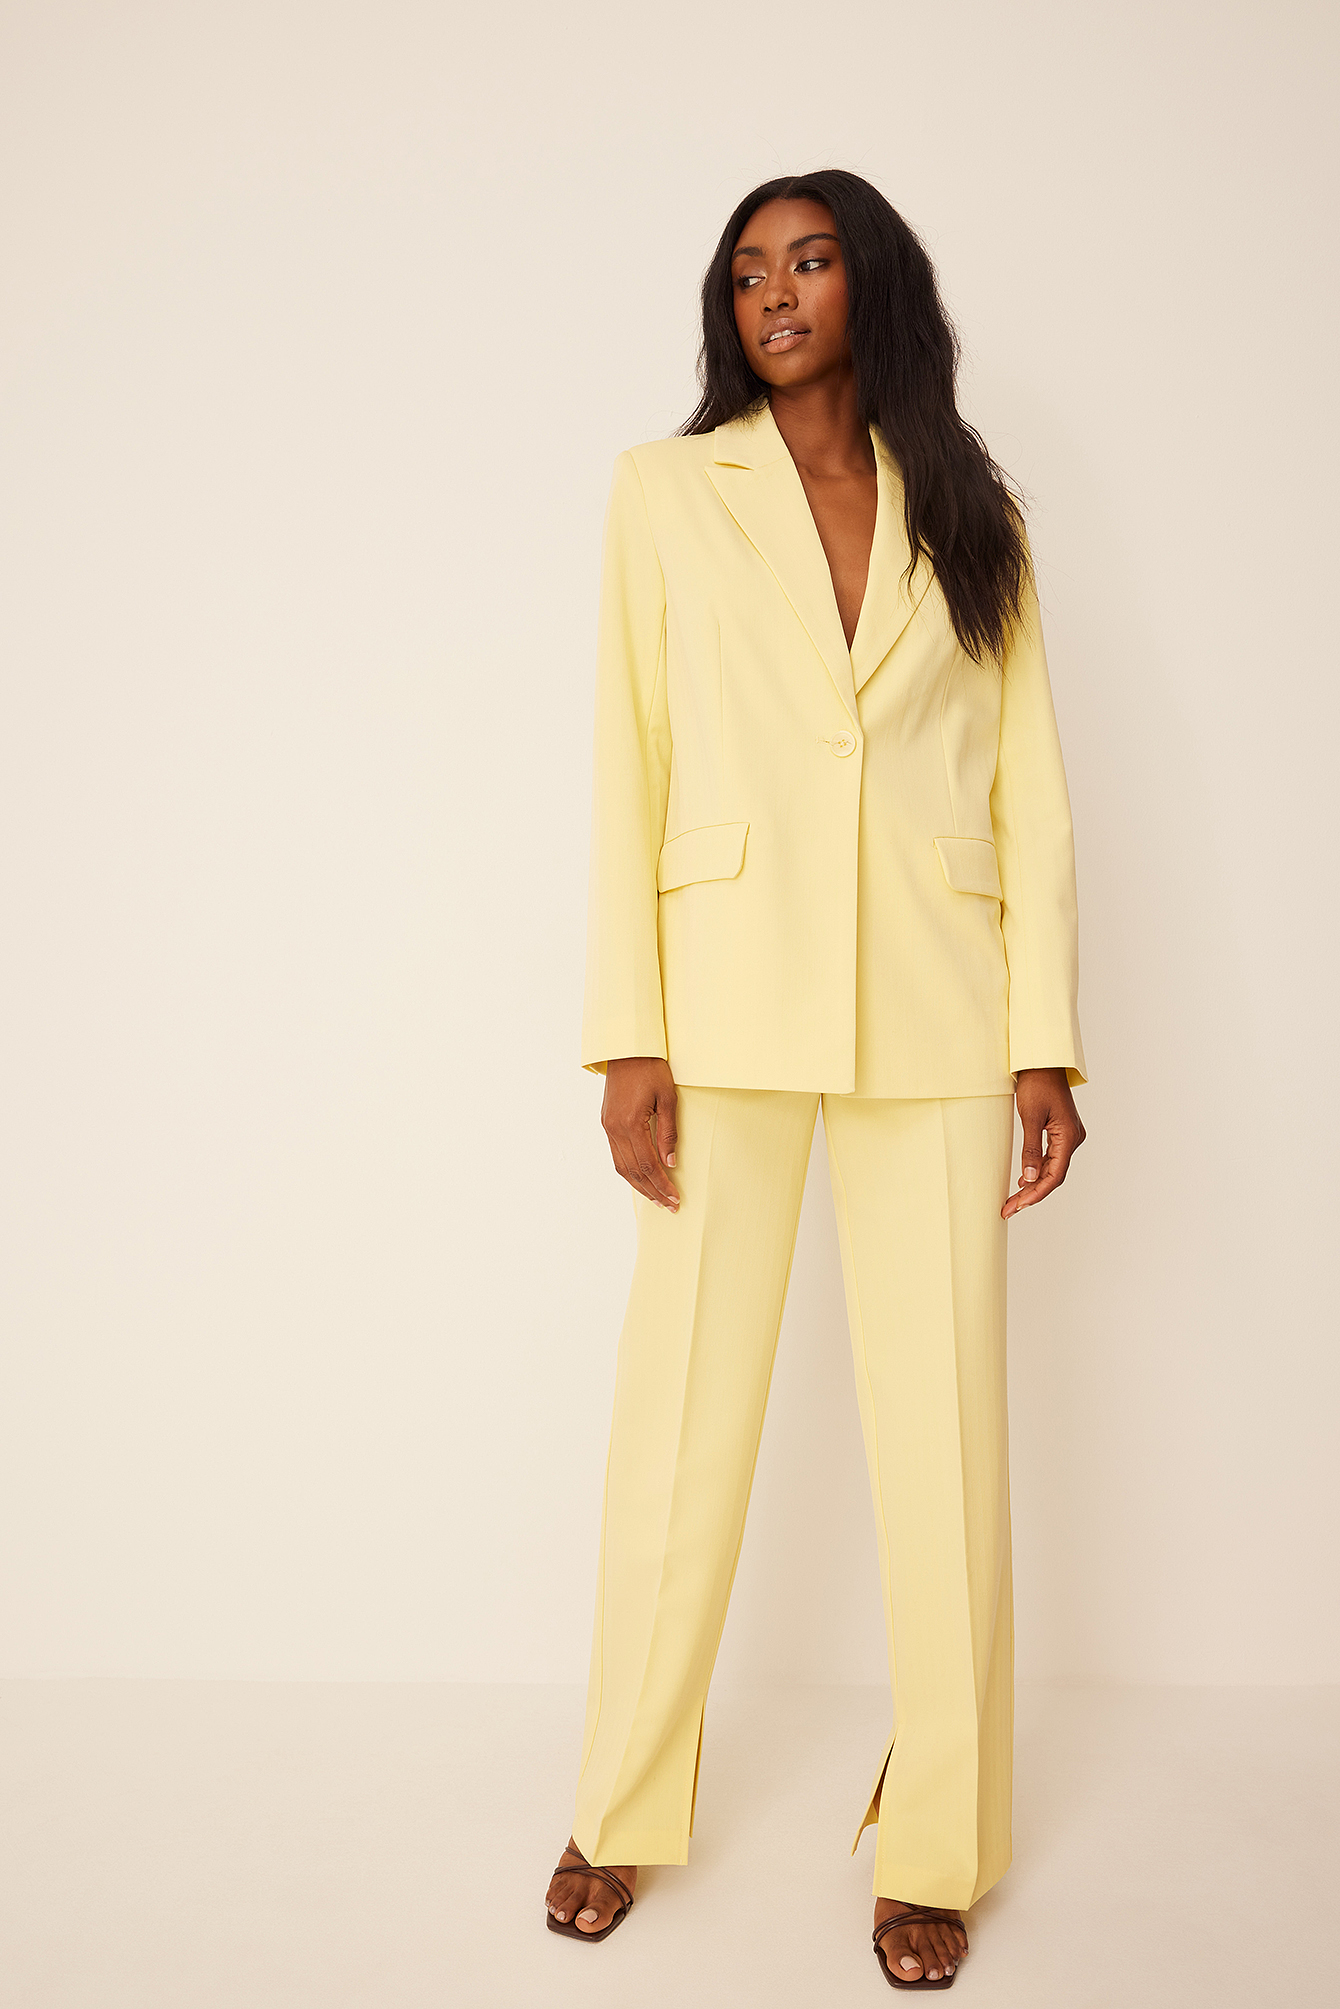 Buy Yellow Suit Sets for Women by POPWINGS Online | Ajio.com